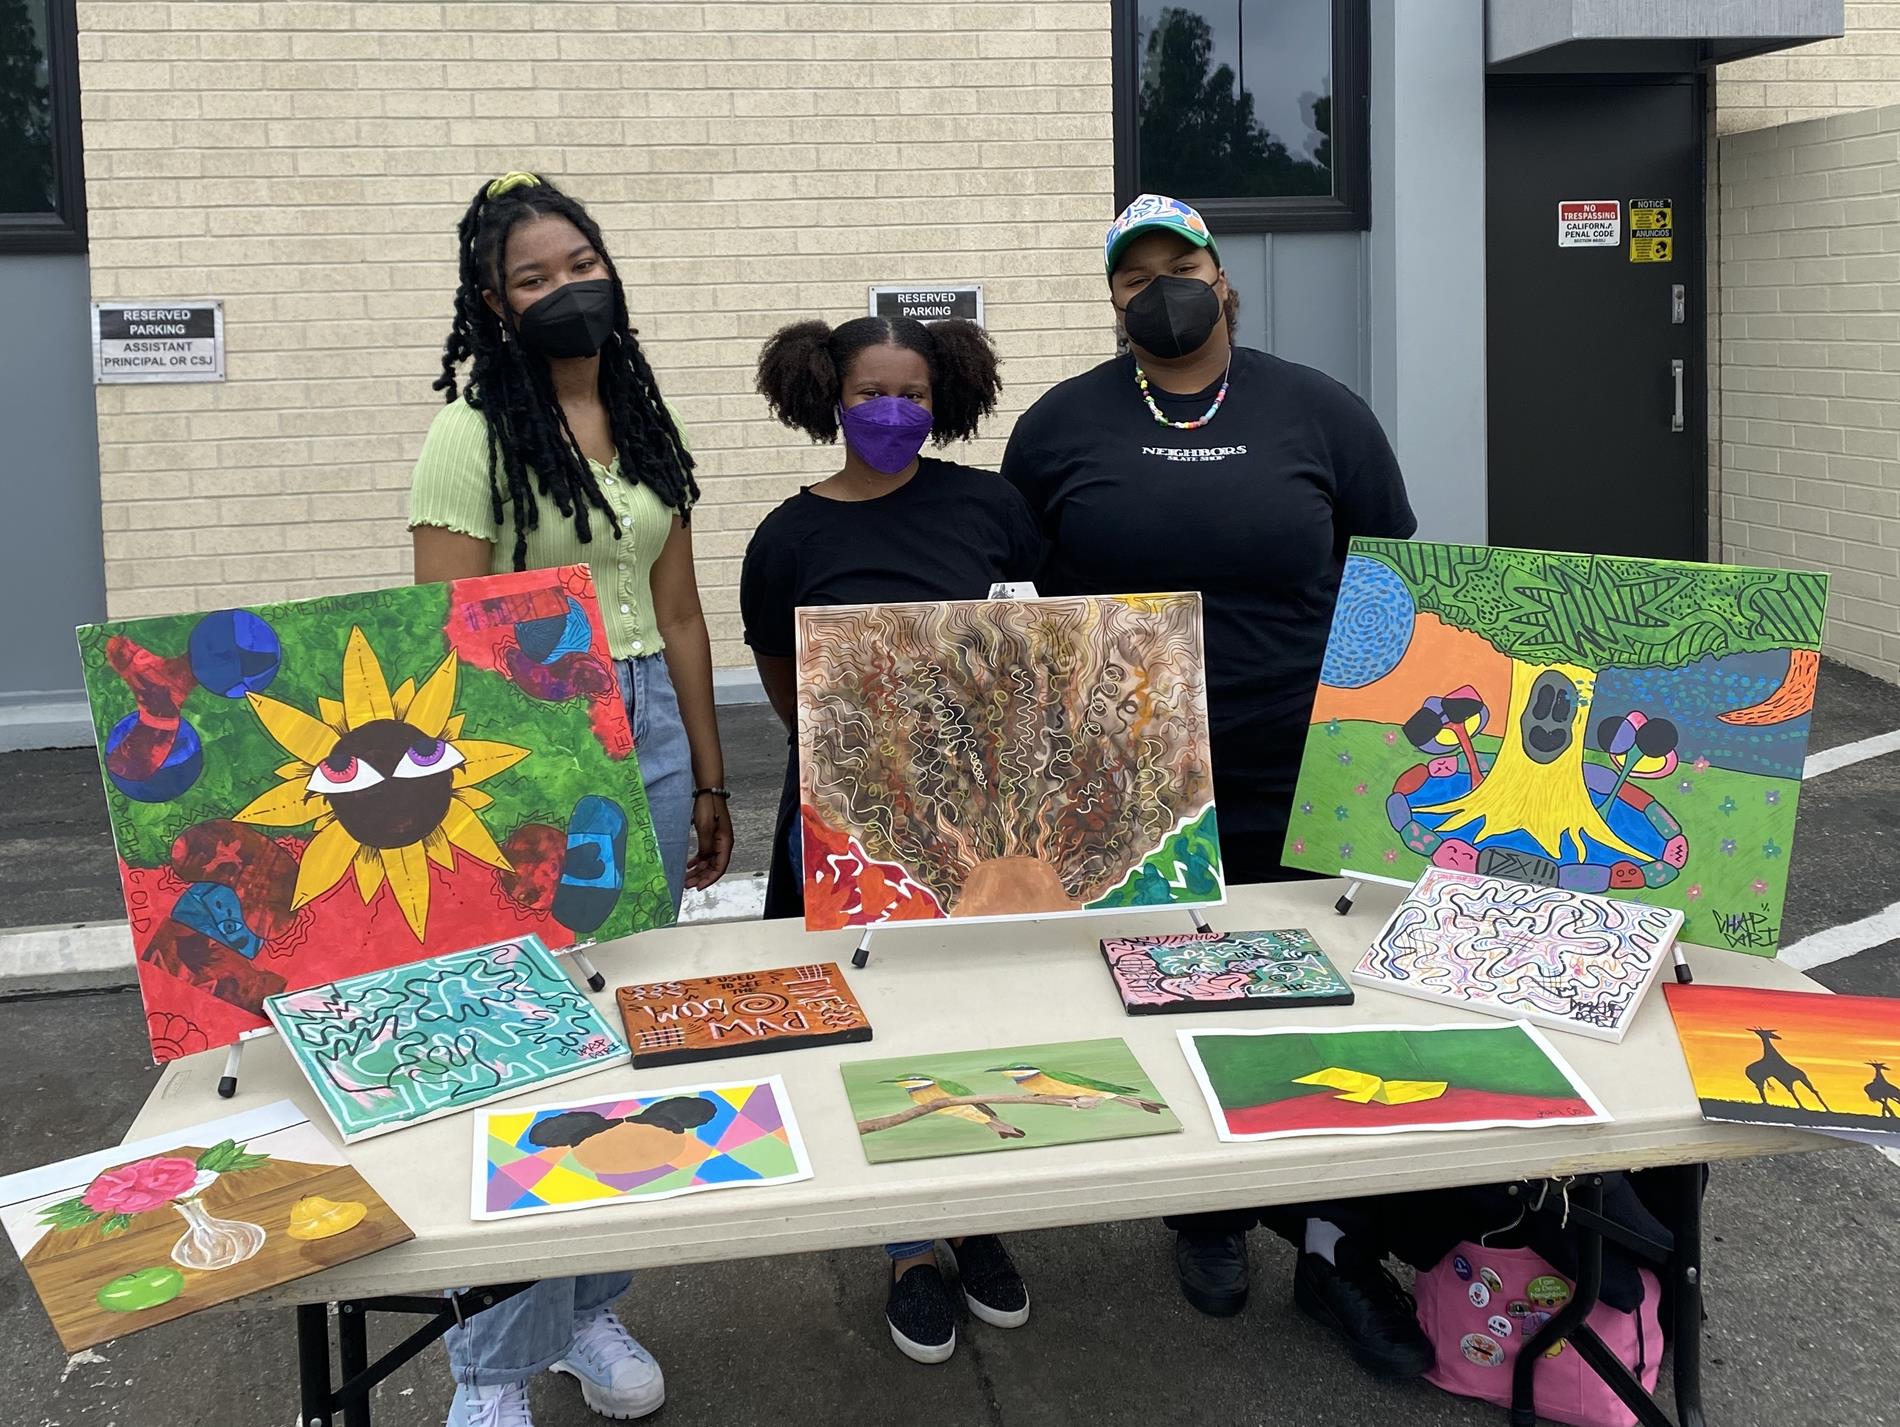 Students with Art on display